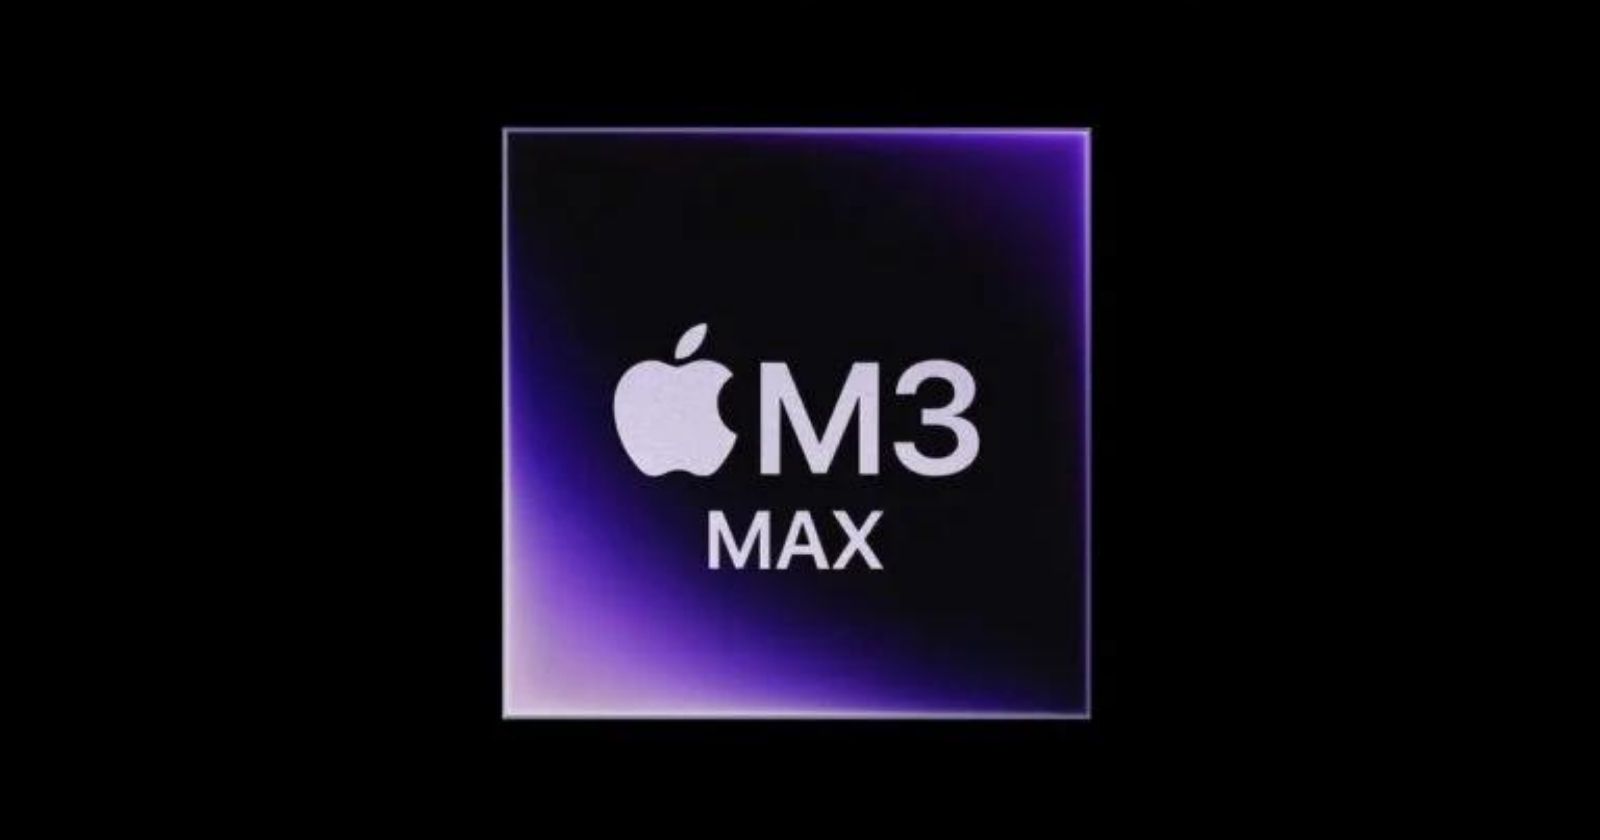 Apple's M3 Max processor is how fast Here are the test results!